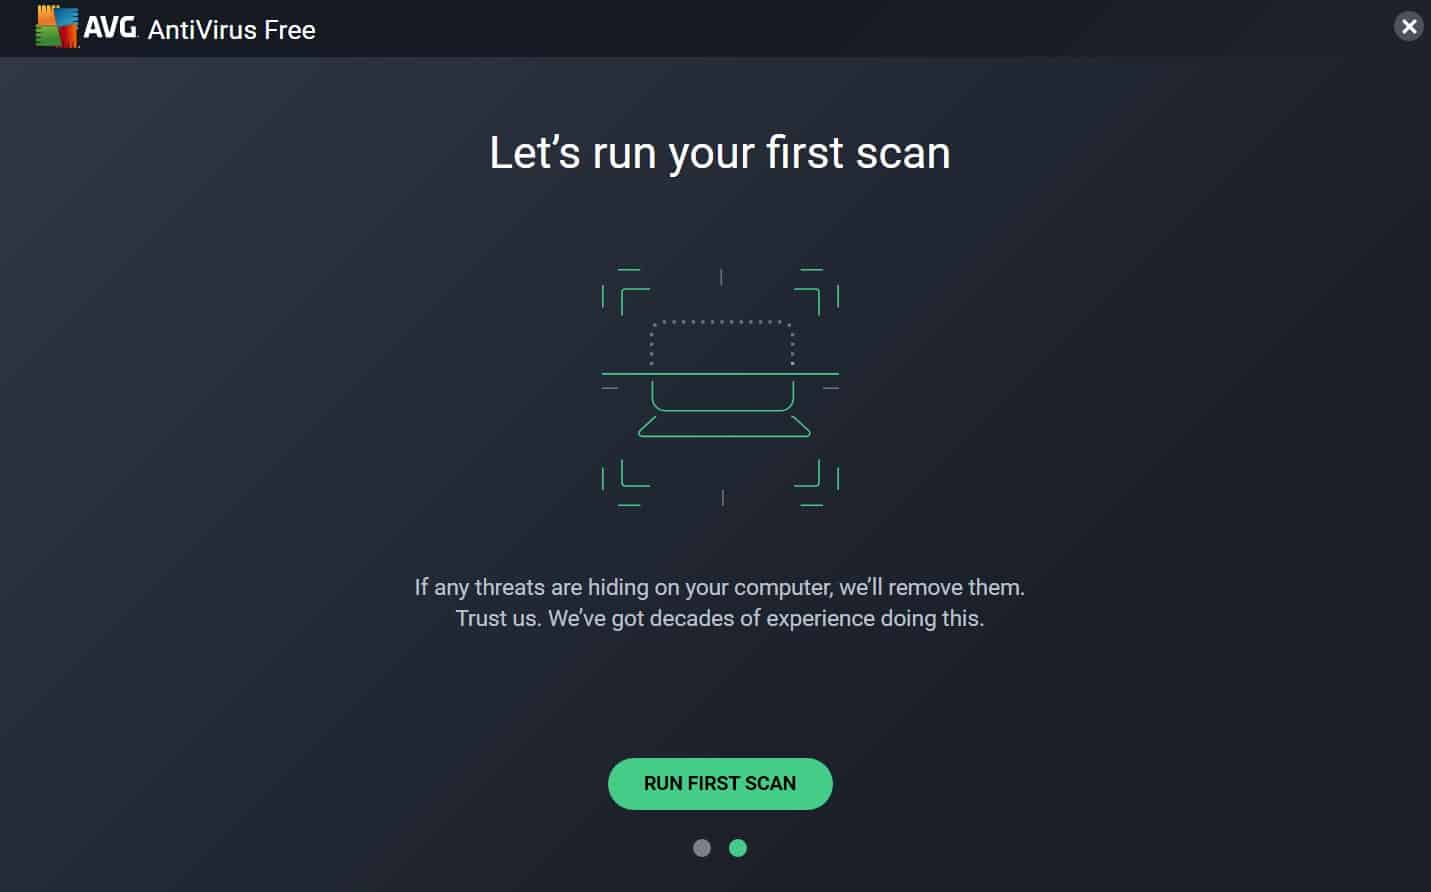 Open your antivirus software.
Select Scan now.